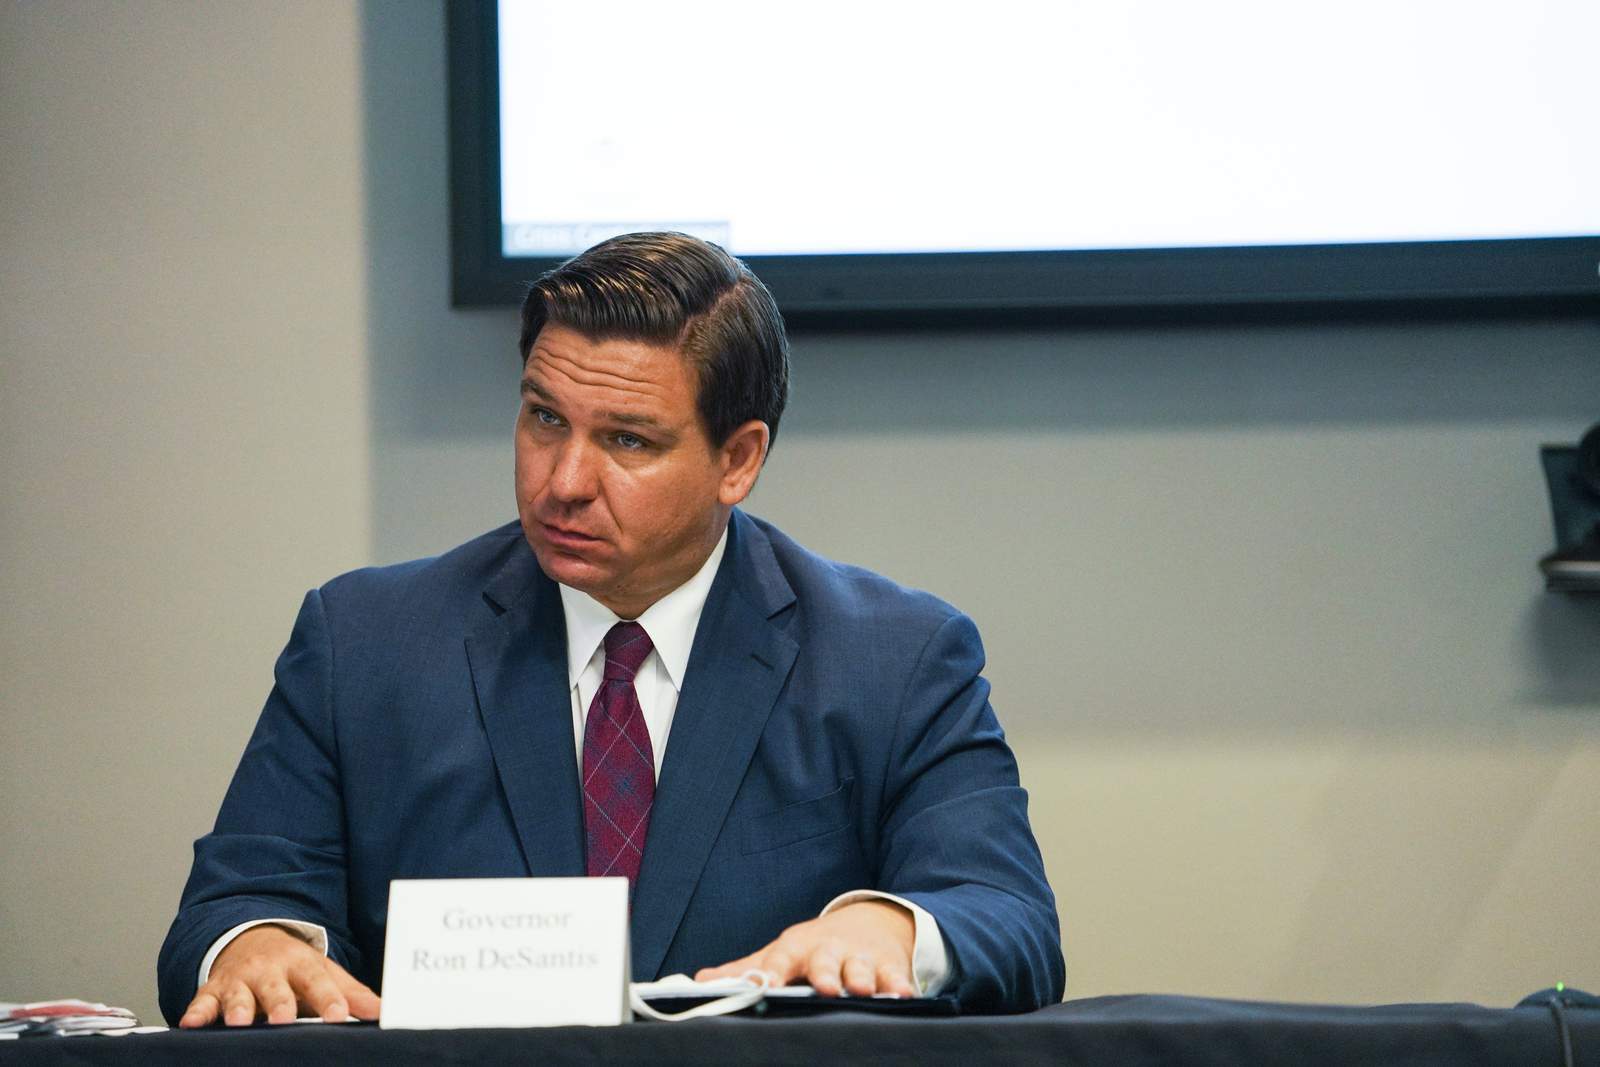 ‘If you’re going to riot, you are going to jail:’ Gov. DeSantis says of potential Tallahassee protests